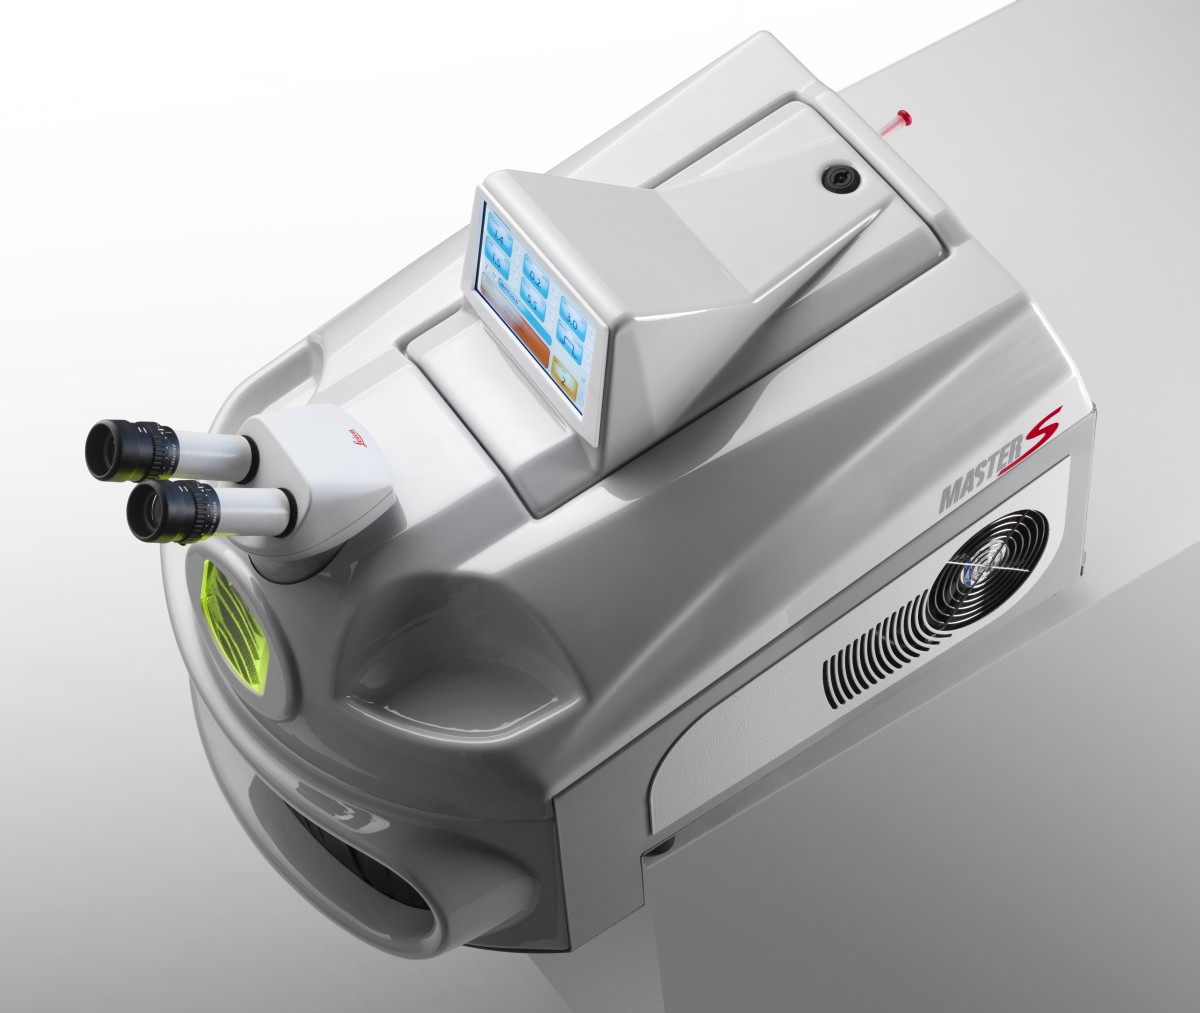 Compact welding laser Master S 130 with microscope and SMOOTH SPOT